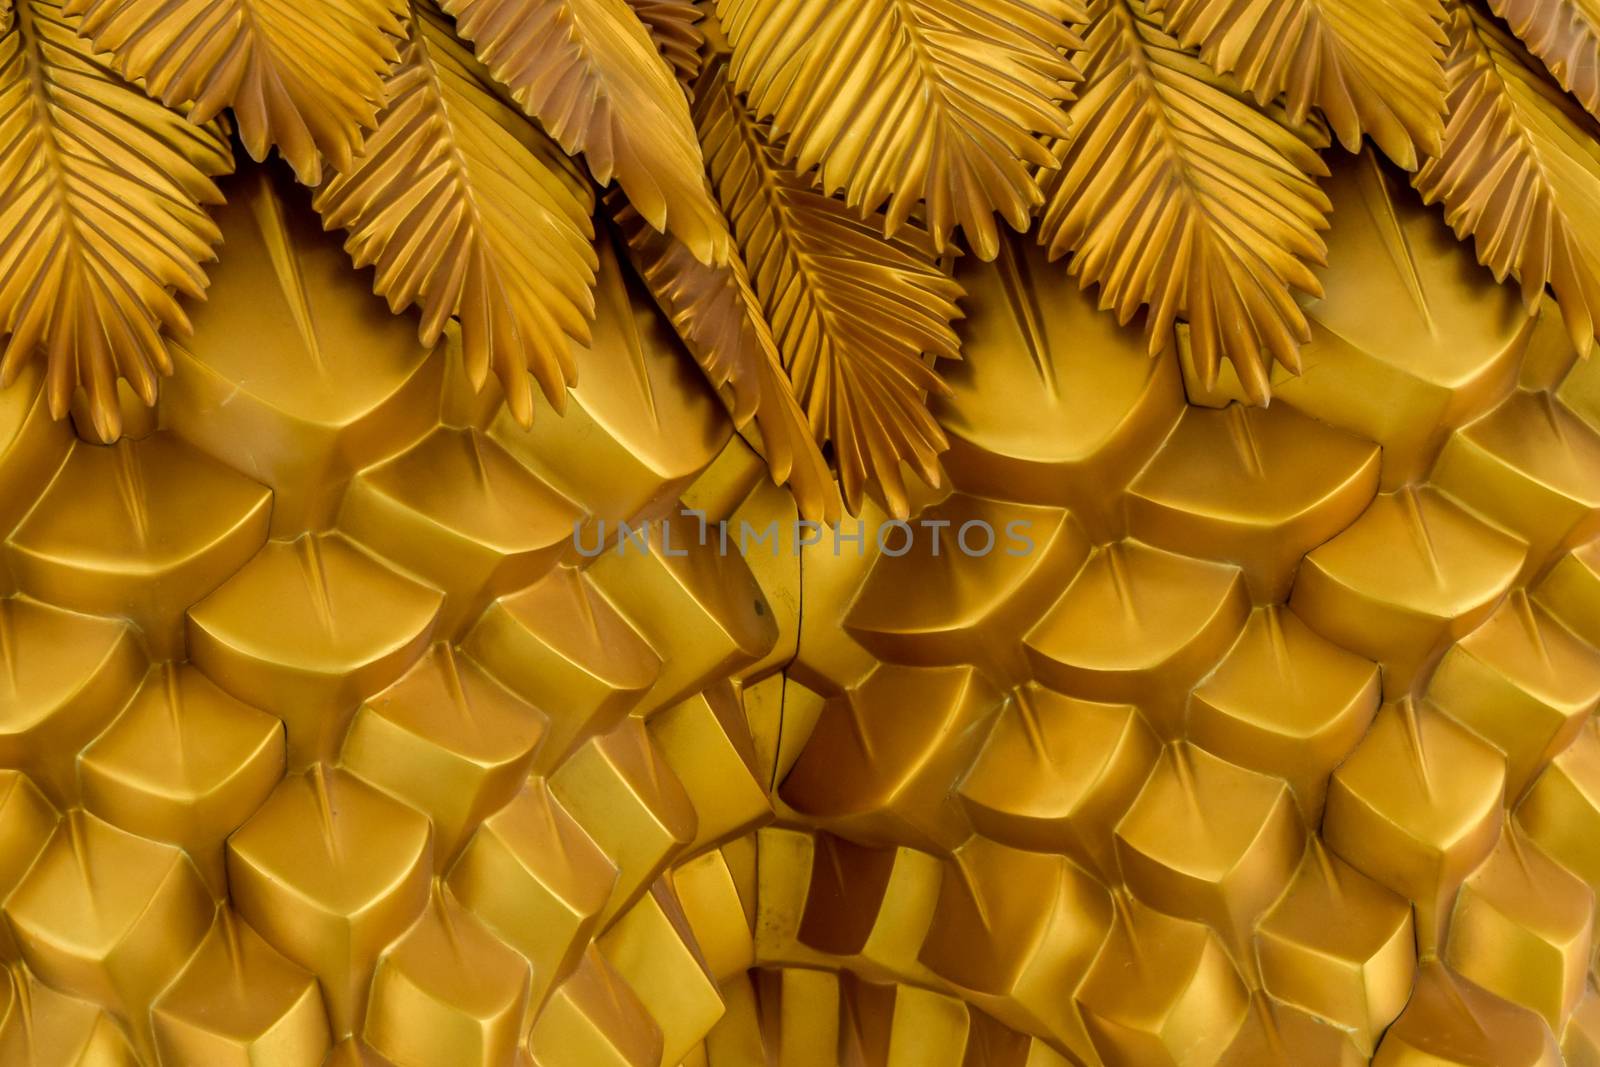 Abstract seamless geometrical wavy background from golden metal shaped and banners with ethnic patterns. Art decor wallpaper style of the tropics. Palm leaves of tropical plant creative composition